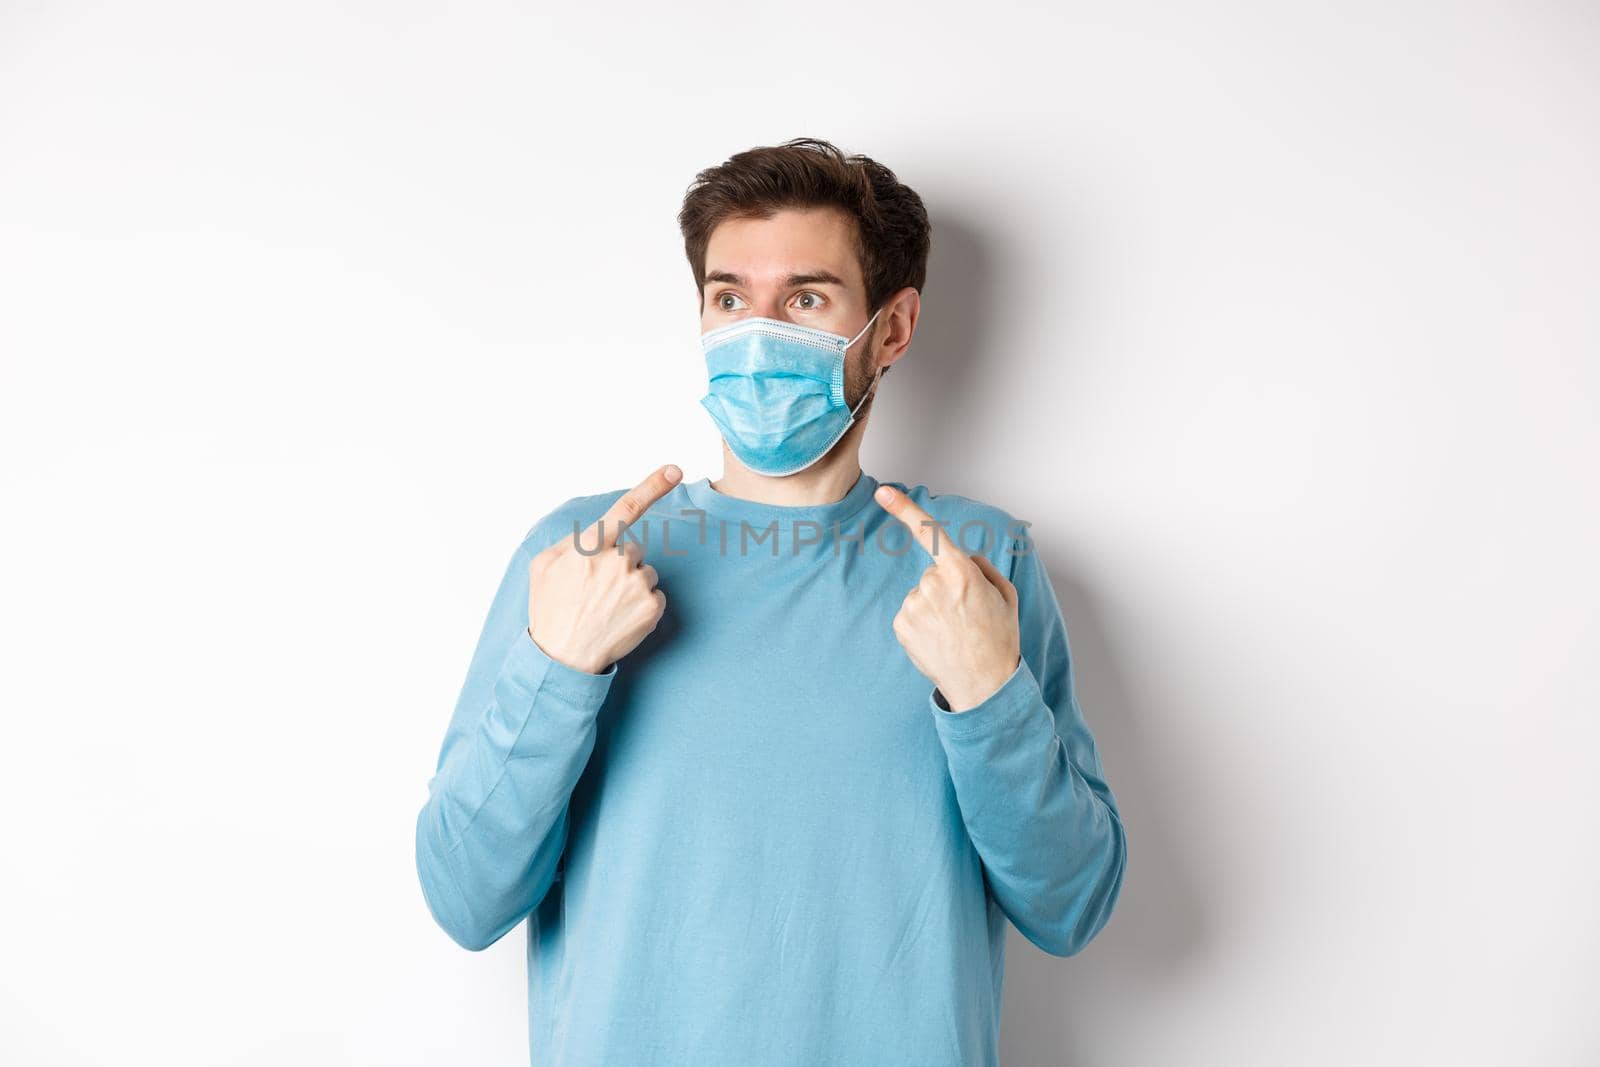 Coronavirus, health and quarantine concept. Confused young man pointing at medical mask on face and looking left, standing over white background.